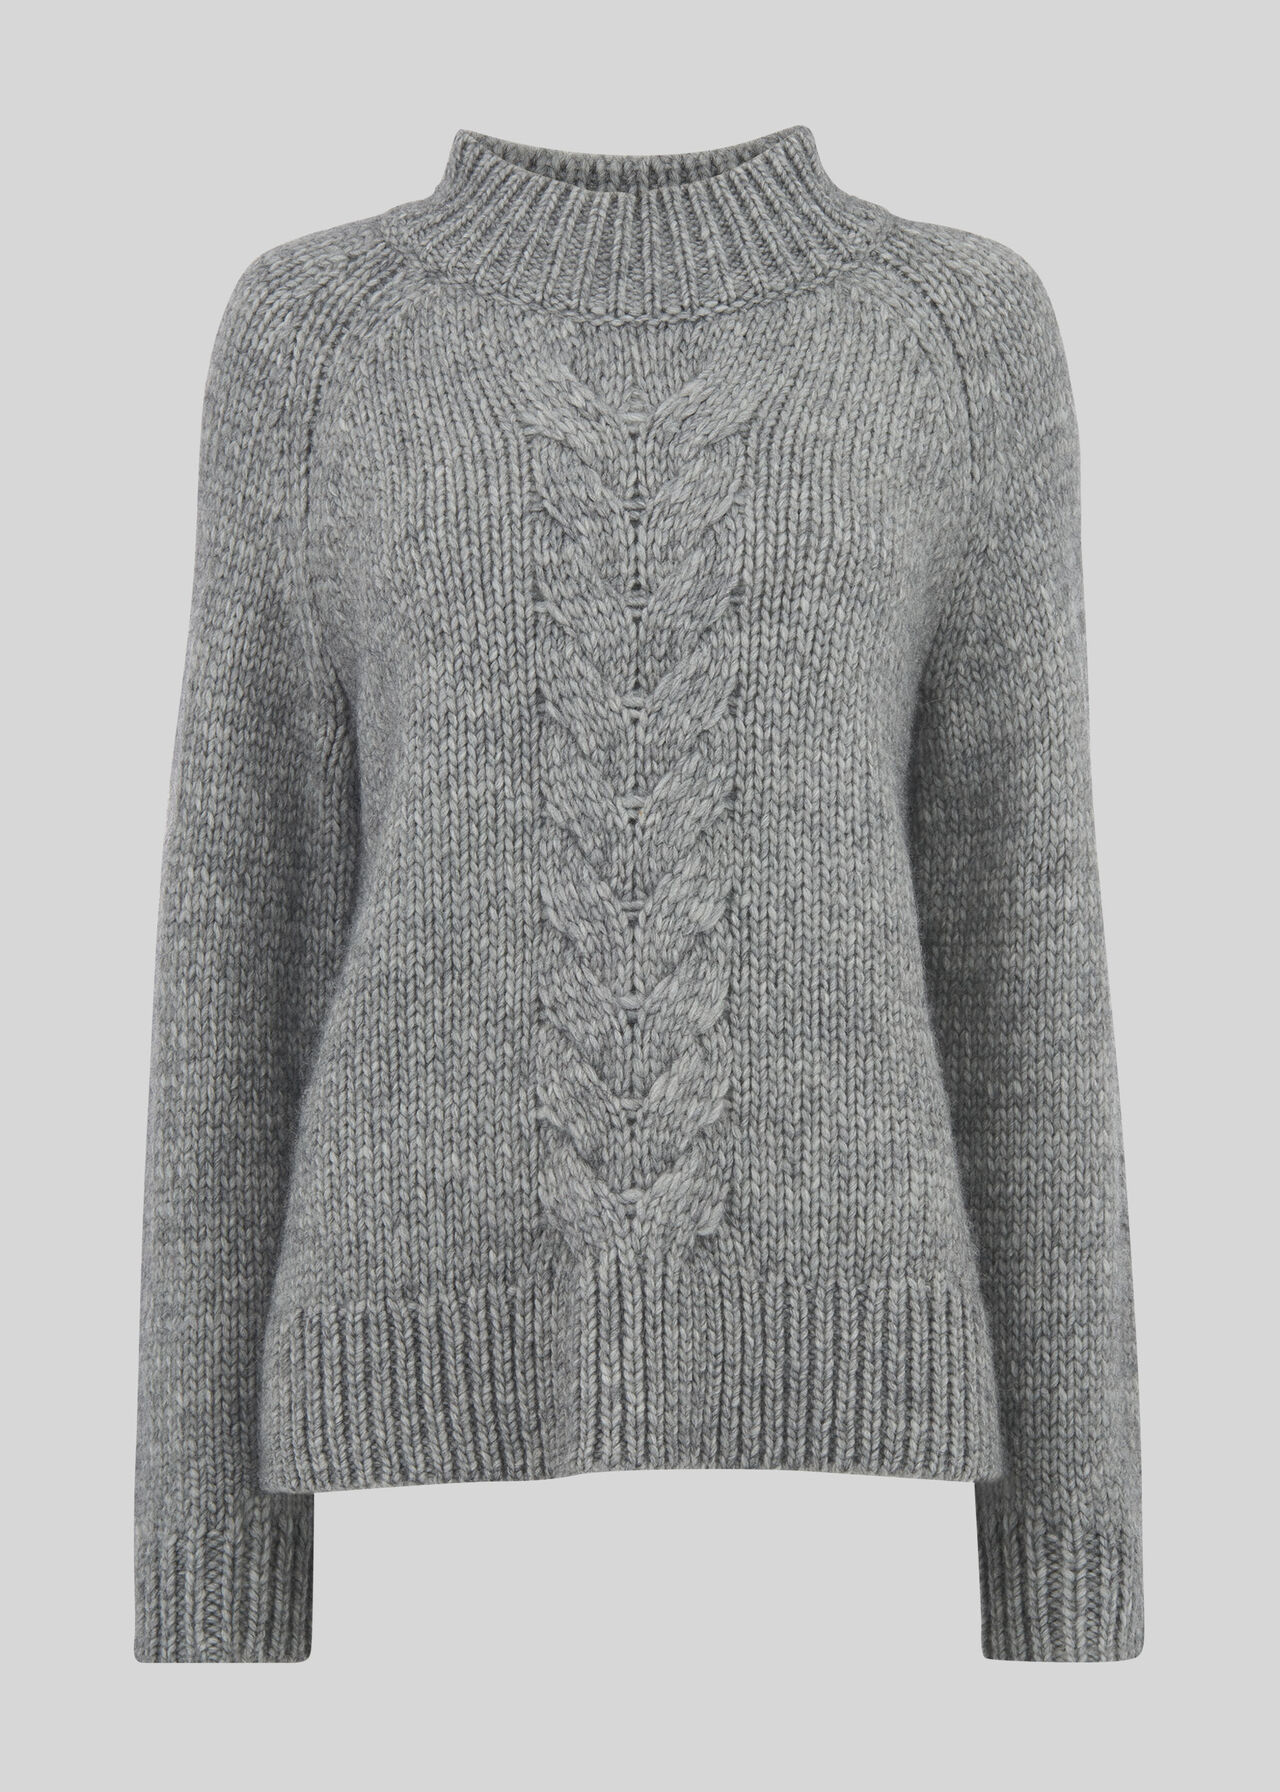 Grey Marl Oversized Cable Alpaca Sweater | WHISTLES